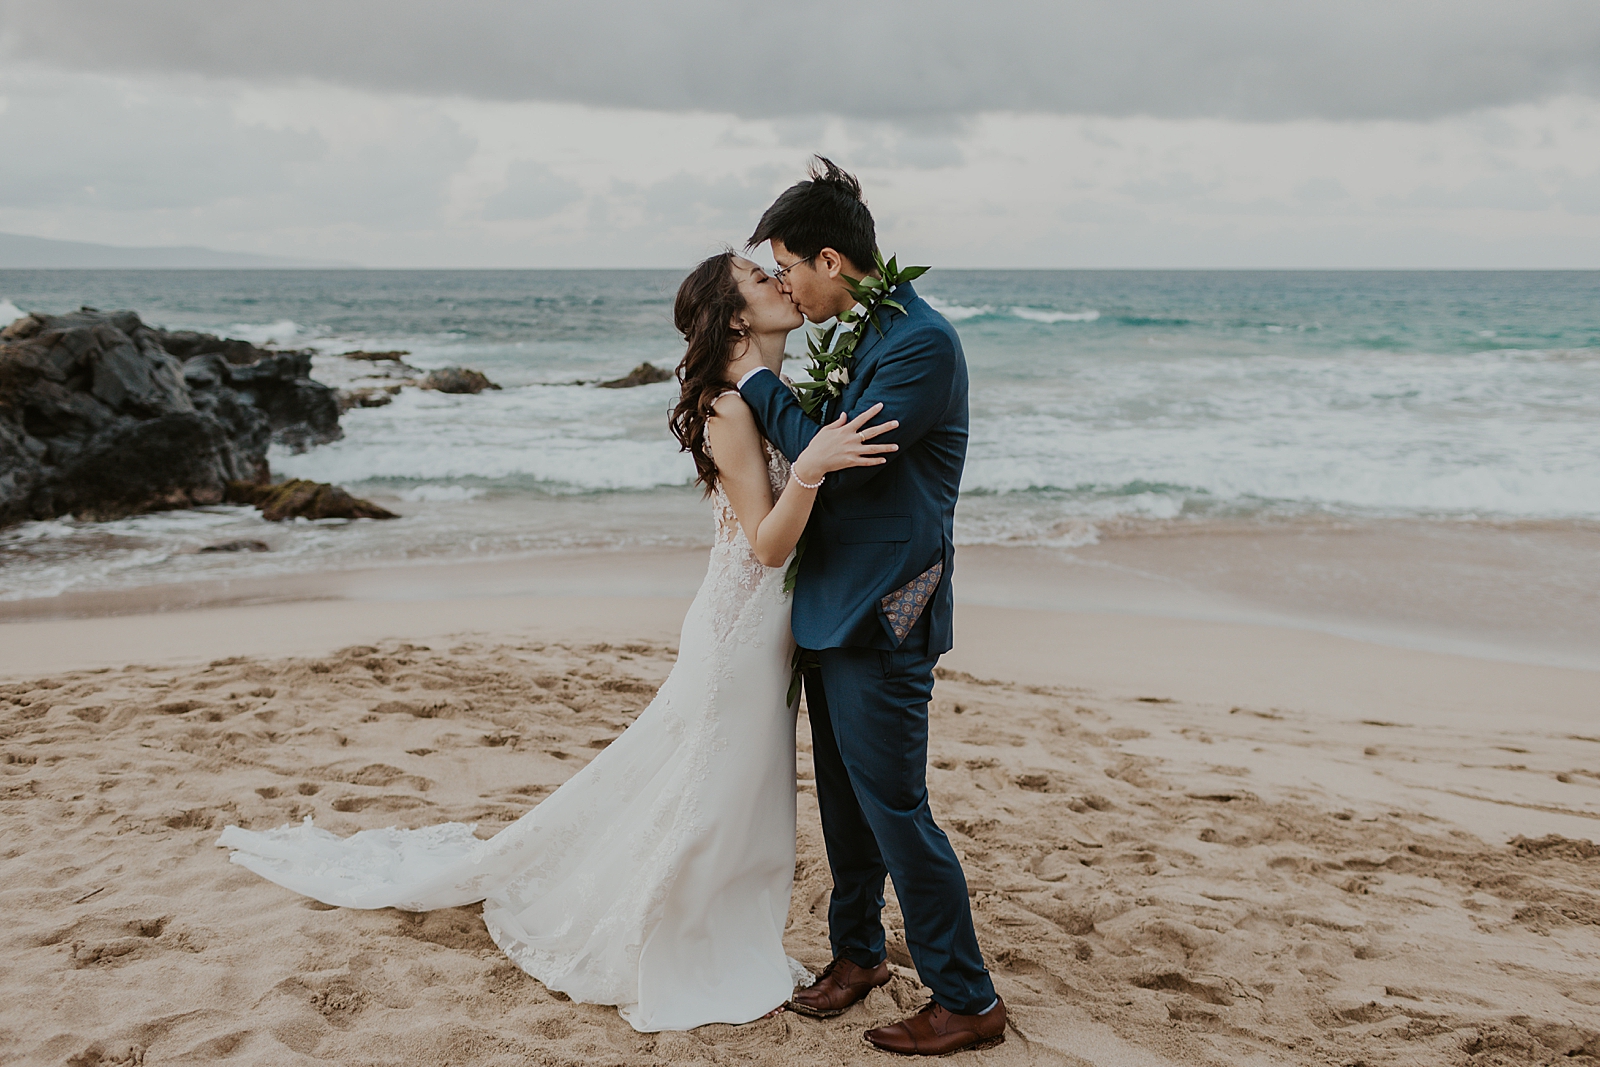 Bride and Groom having a passionate kiss on the beach in front of the water